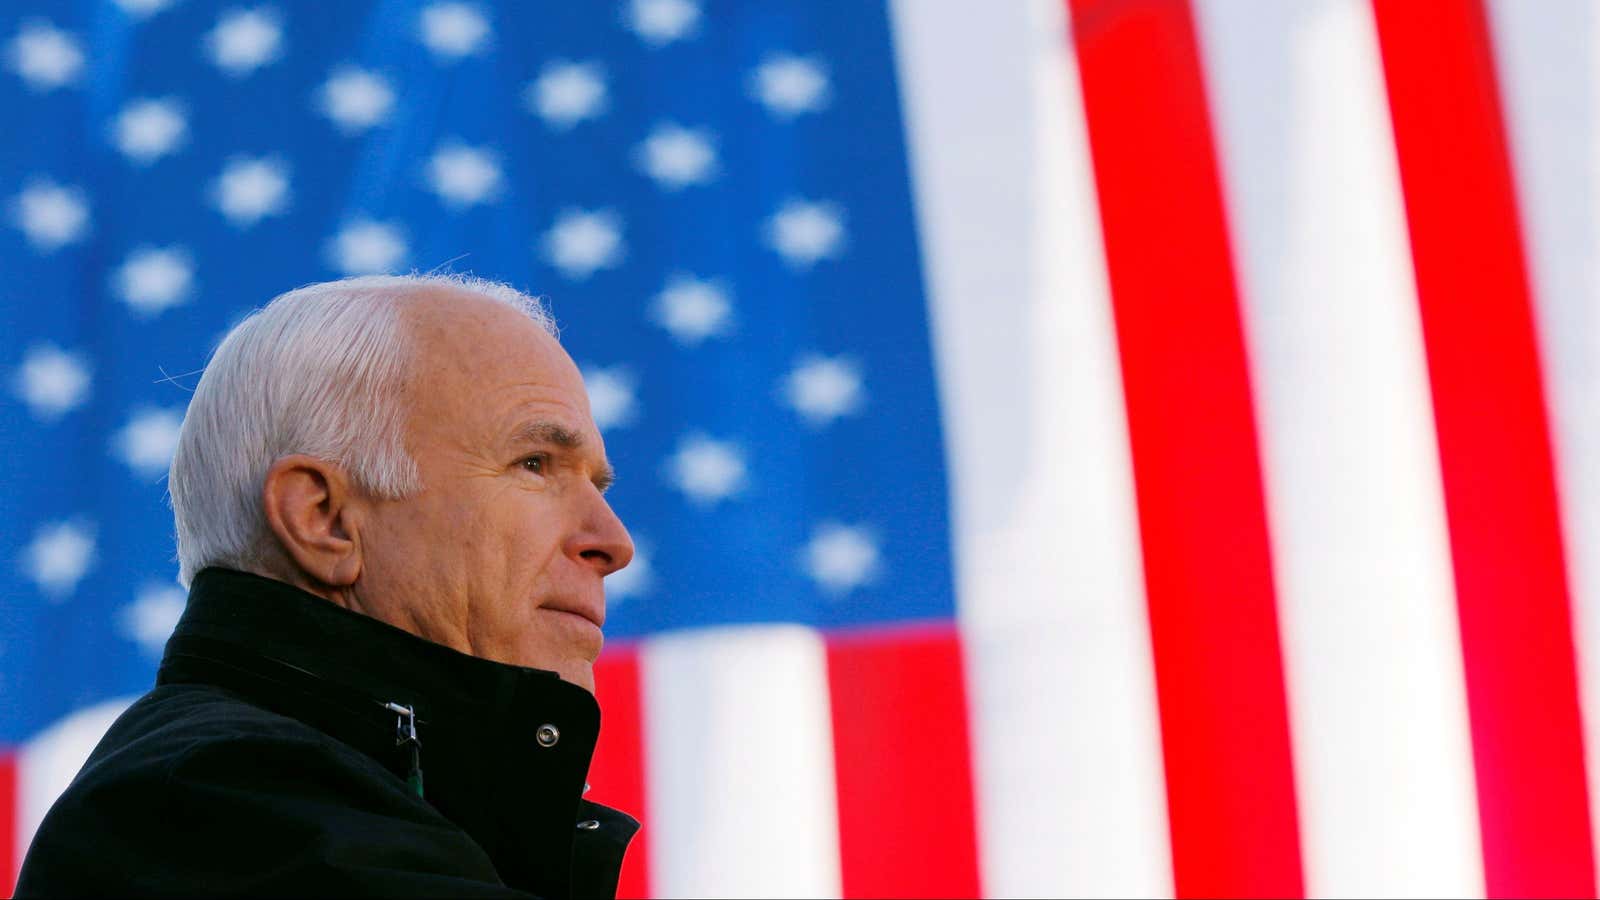 McCain was a vocal advocate for America’s position as a global leader.